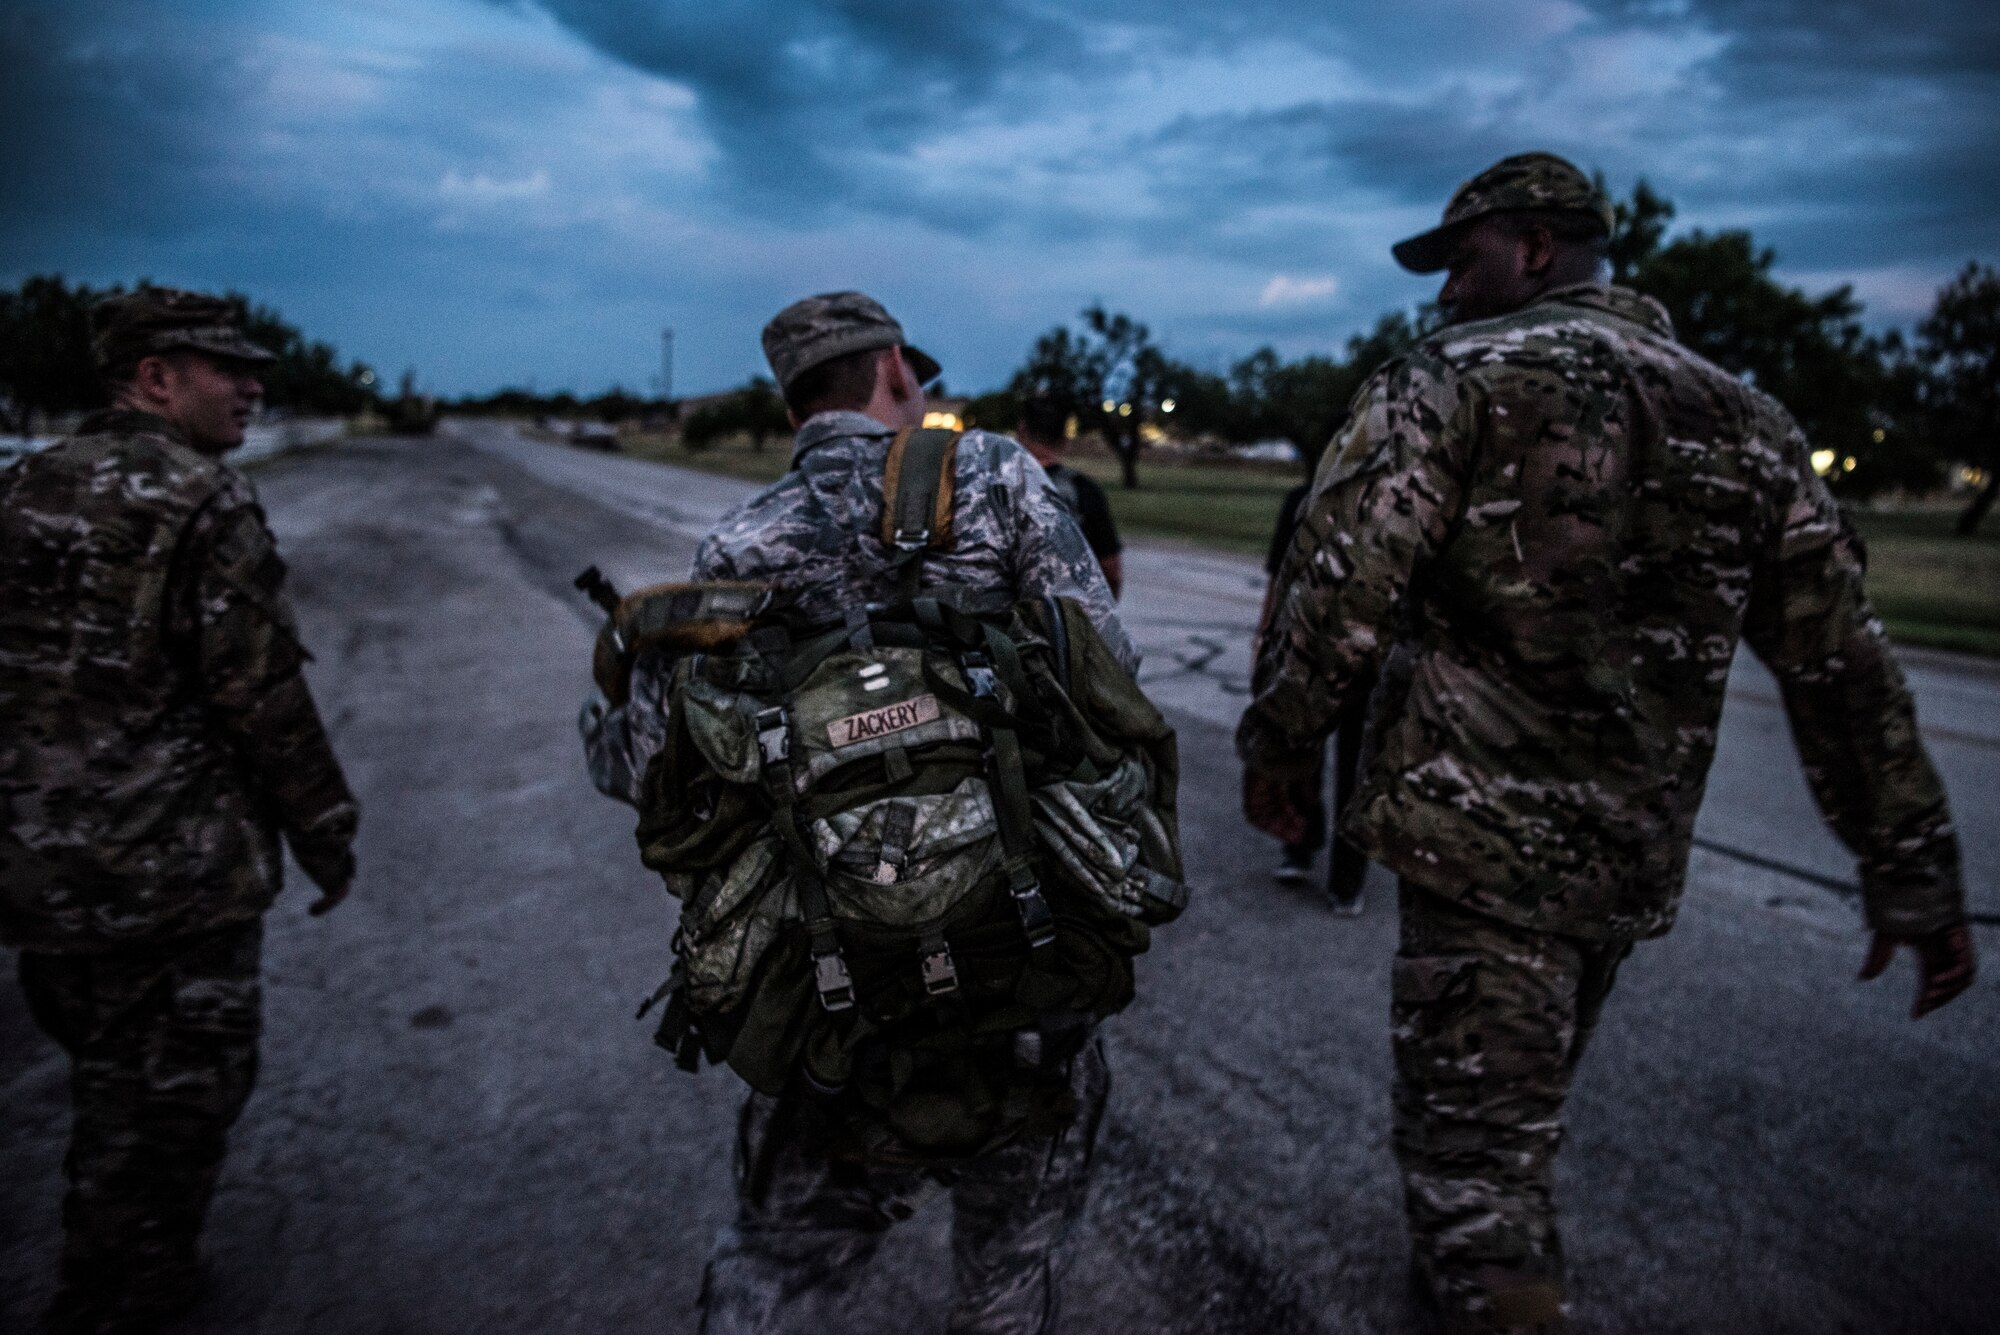 Airman 1st Class Justin Welch, 47th Flying Training Wing Command Post emergency actions controller, puts on a ruck pack during “Walk with the Chief” ruck march at Laughlin Air Force Base, Texas, July 23, 2019. “Walk with the Chief” is a monthly opportunity to interact with Laughlin’s command chief, Chief Master Sgt. Robert Zackery III, in a fun and informal setting, and prepare Airmen for a deployed environment. (U.S. Air Force photo by Airman 1st Class Marco A. Gomez)